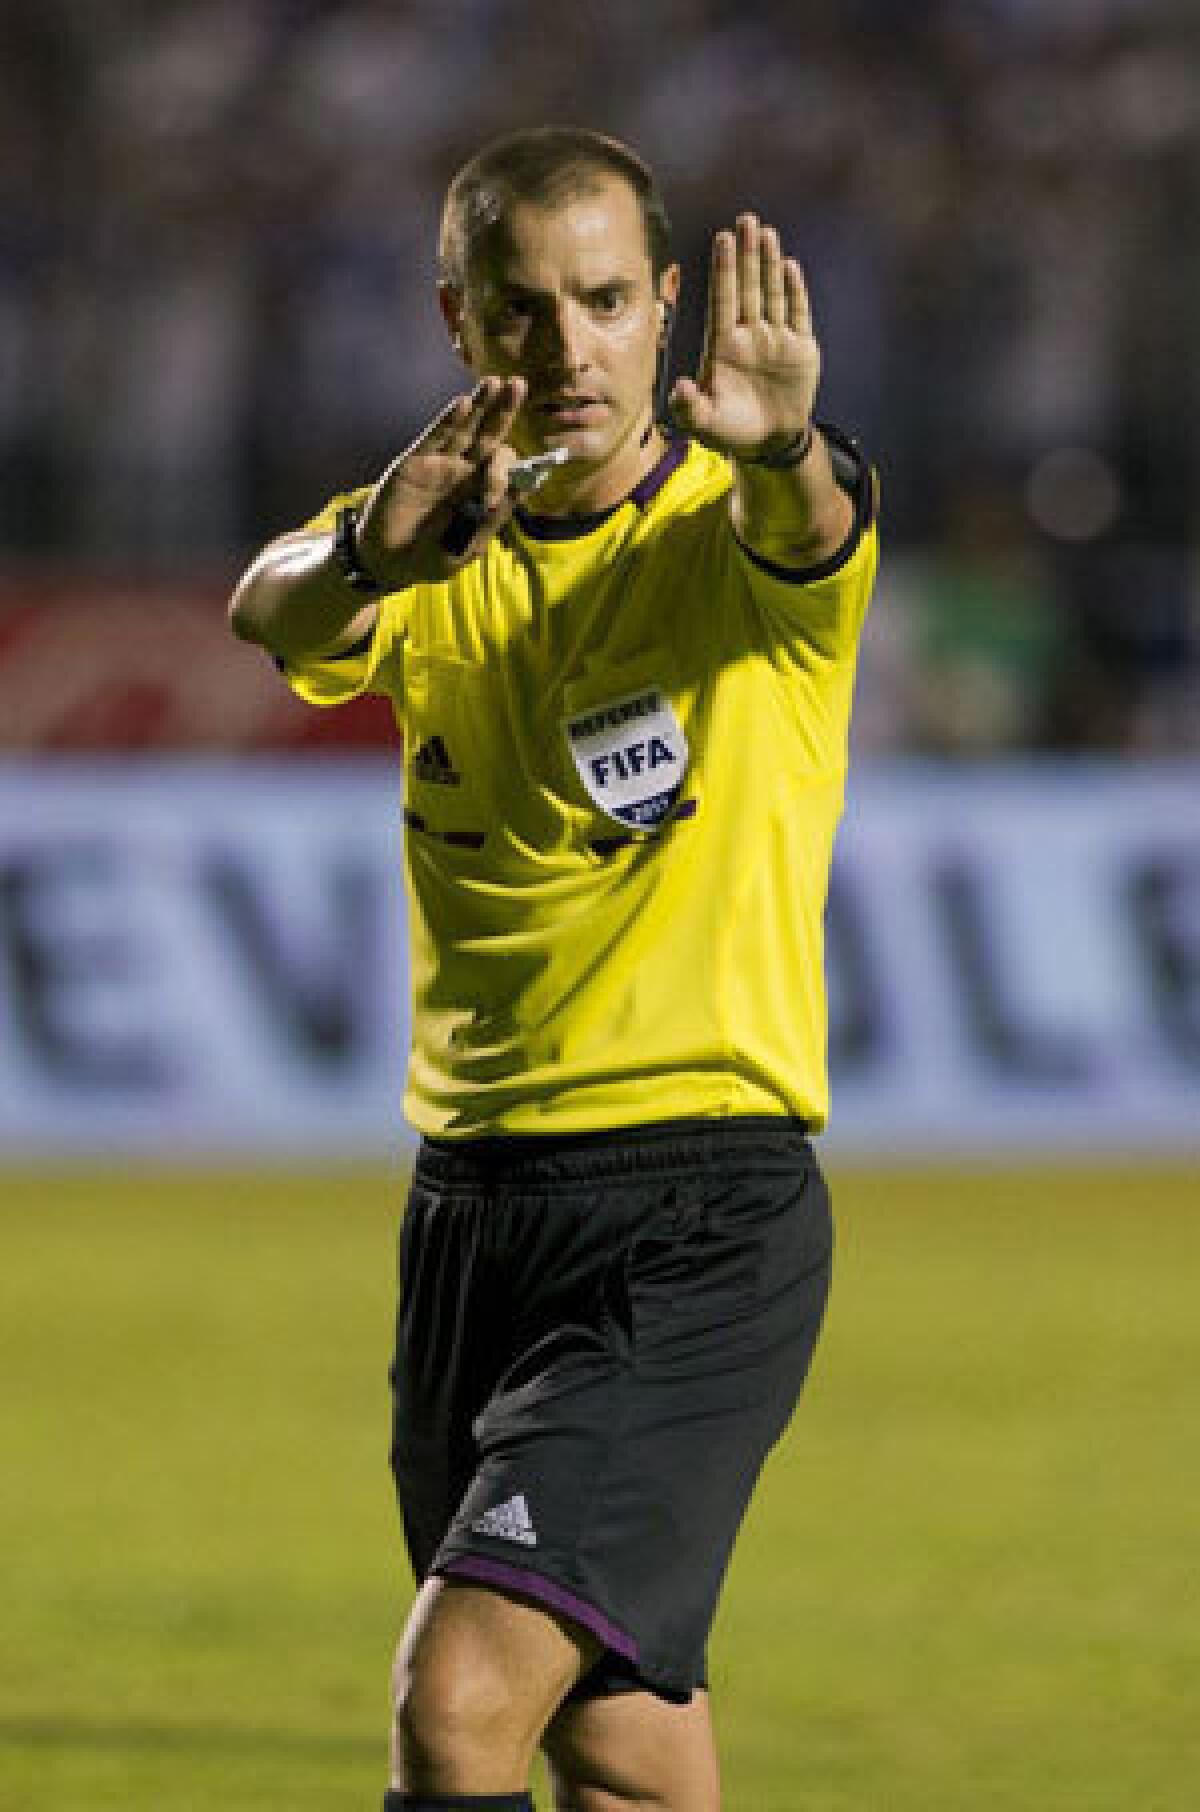 Mark Geiger, who has worked MLS games since 2004, will ref at the World Cup this year.